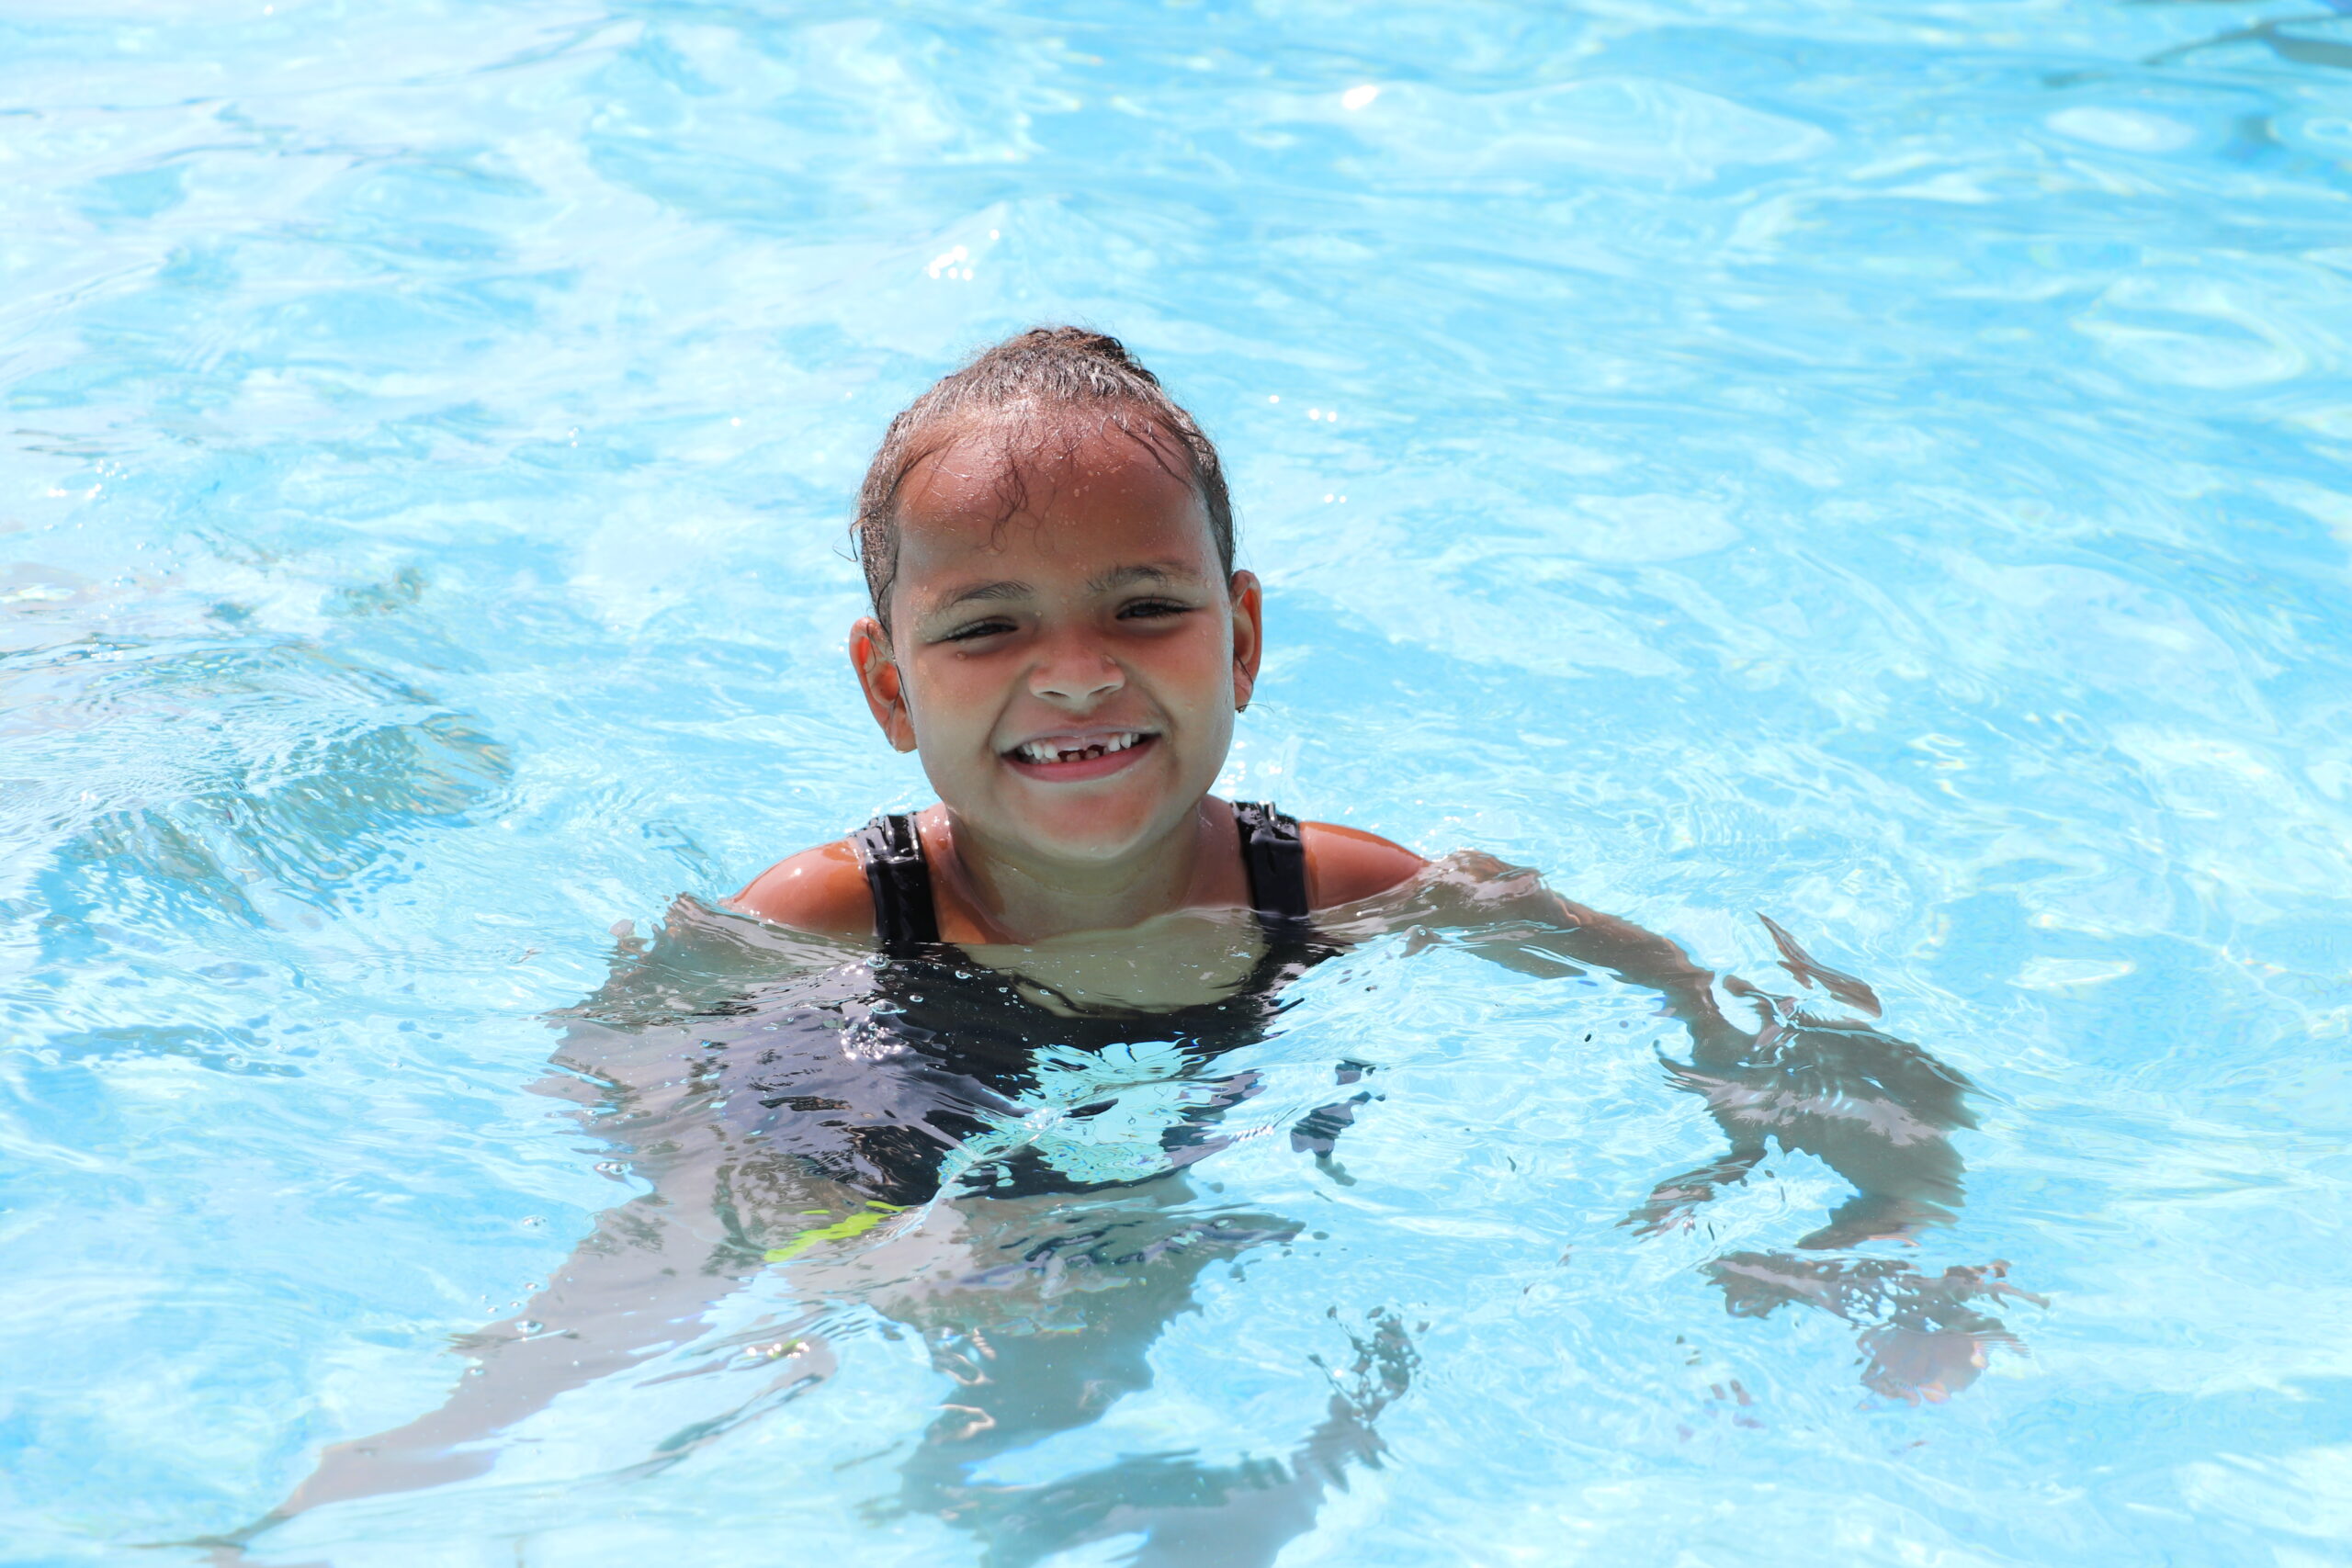 des pools of large and small sizes and an outdoor heated pool. Whether swimming for exercise or pleasure, make the most of your JCC membership by using the pool to its fullest this summer.